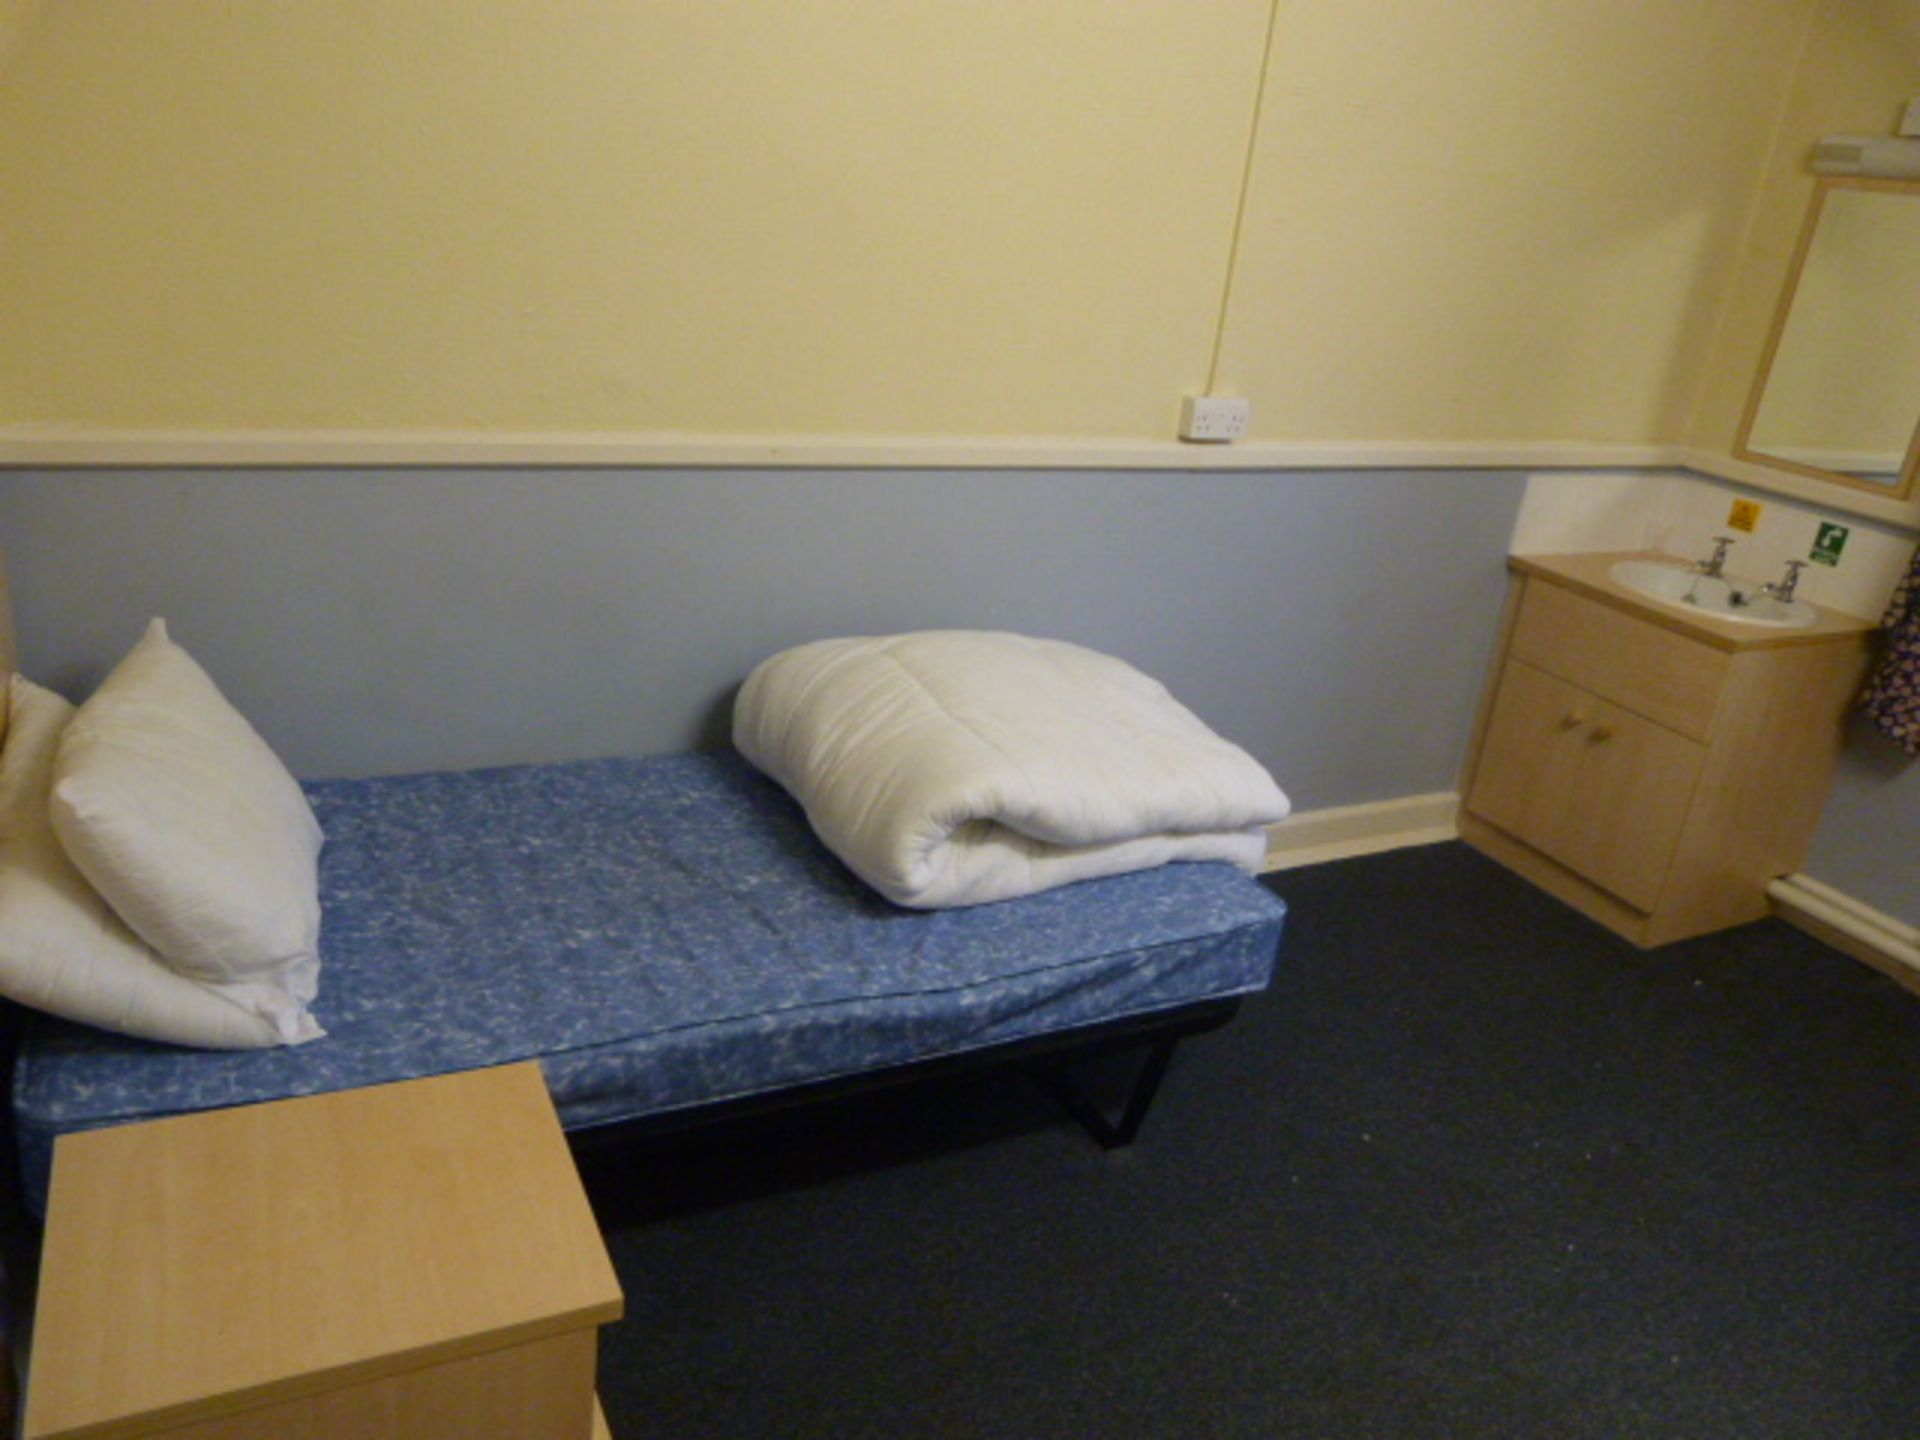 *Contents of Room 14; Single Bed with Matress, Bed